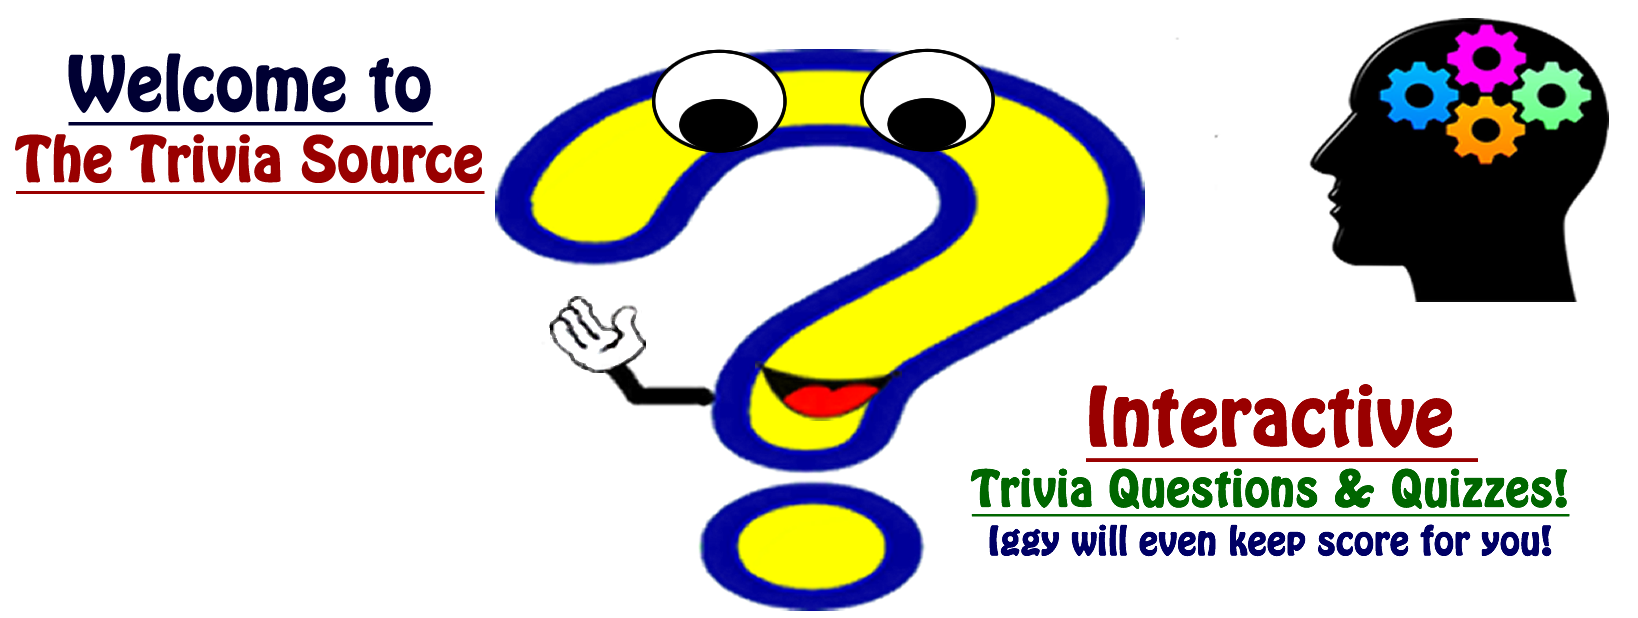 The Trivia Source Question Mark Logo and Profile Picture